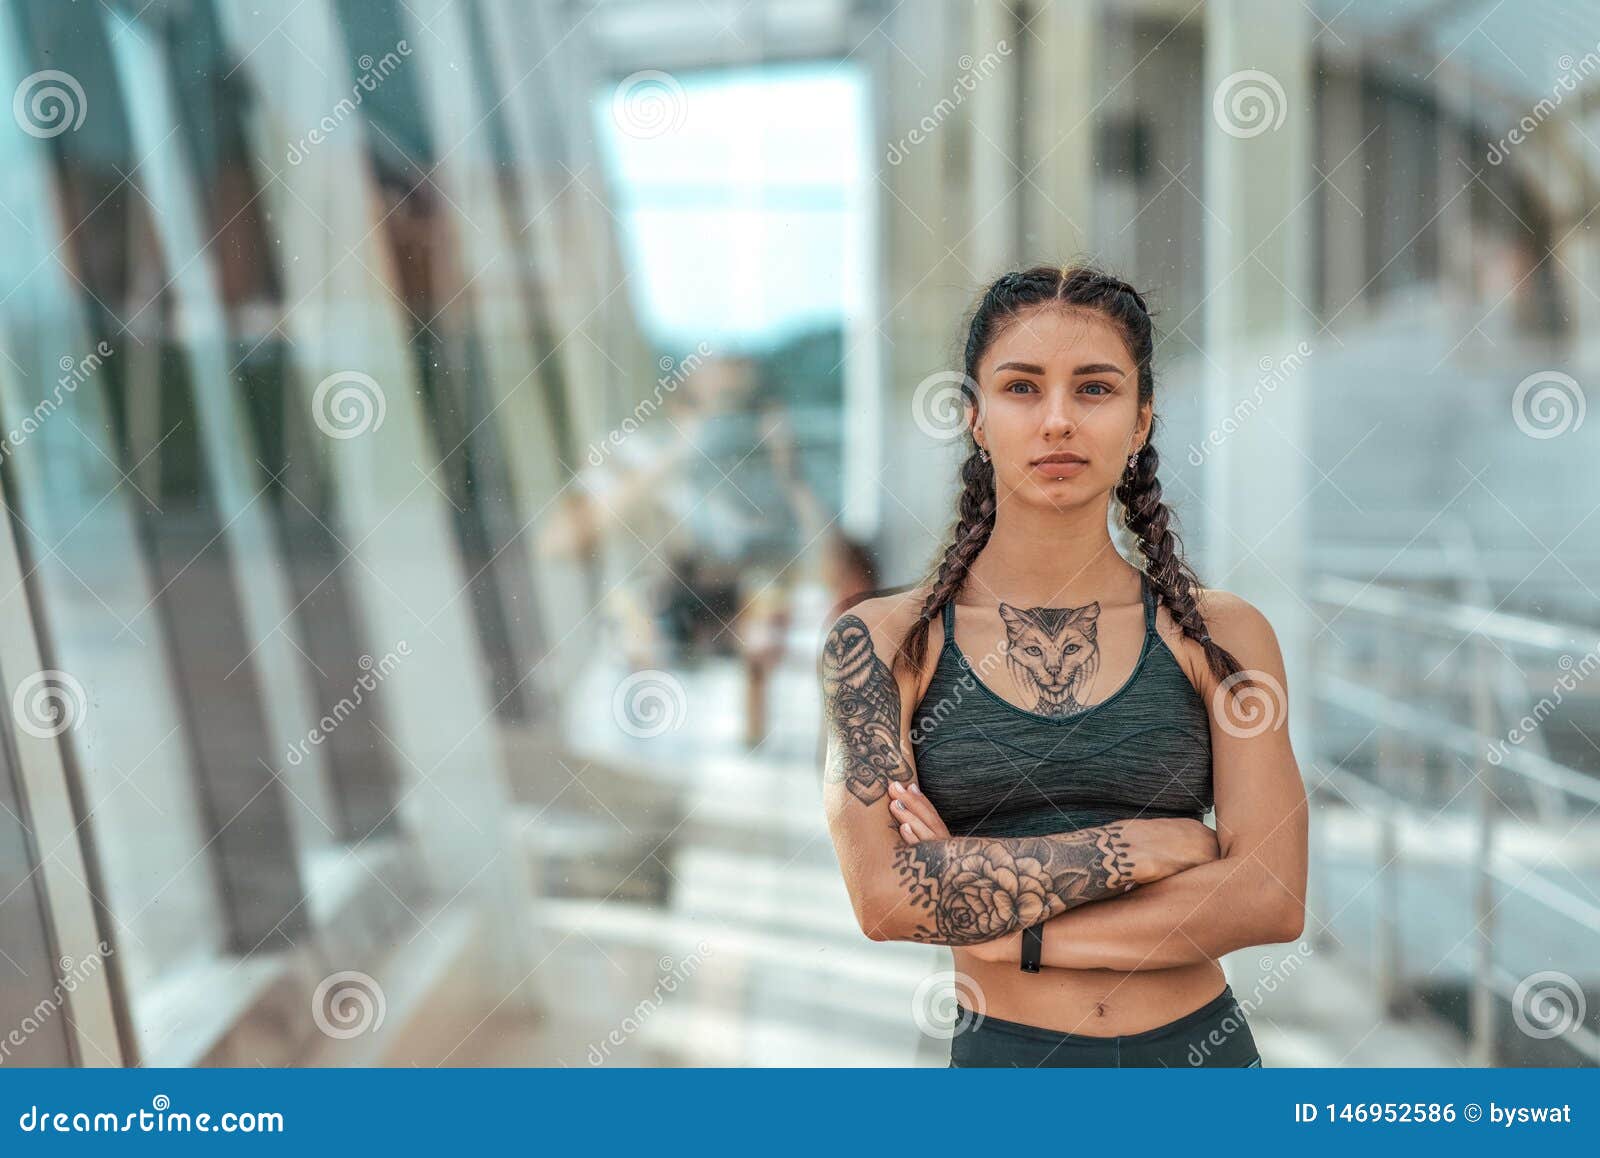 Premium Photo | Beautiful wet athlete girl with tattooed hand in sportswear  resting after running